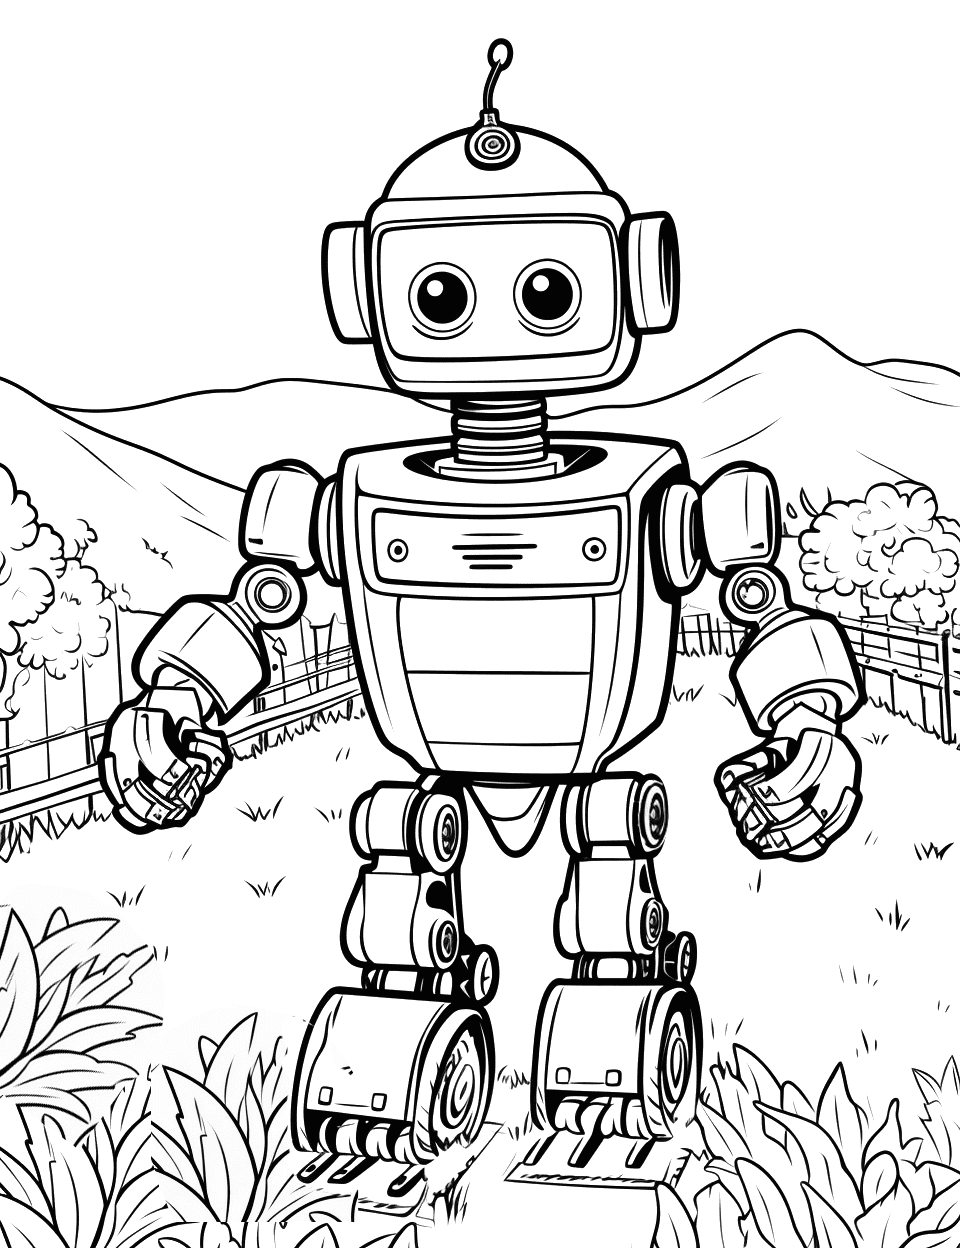 Robot Farmer in the Fields Coloring Page - A robot harvesting crops on a farm.